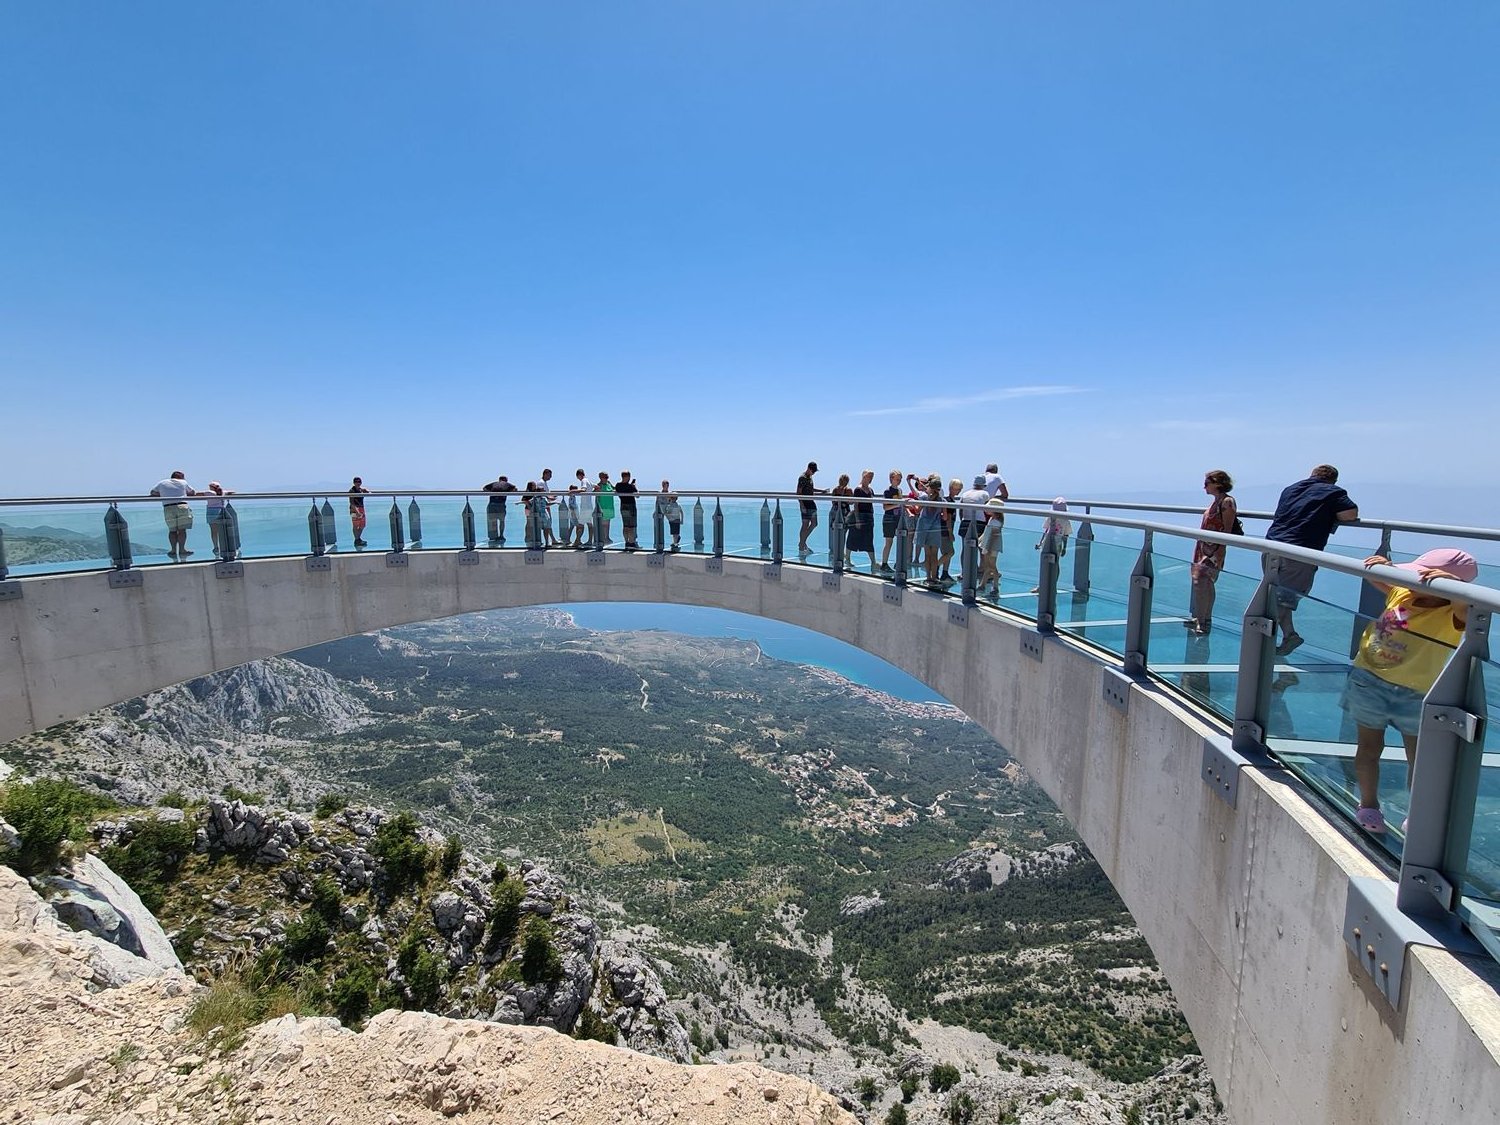 a glass bridge arching out from the mountain edge with people standing on it and adrop below with a view of the coast in the distance